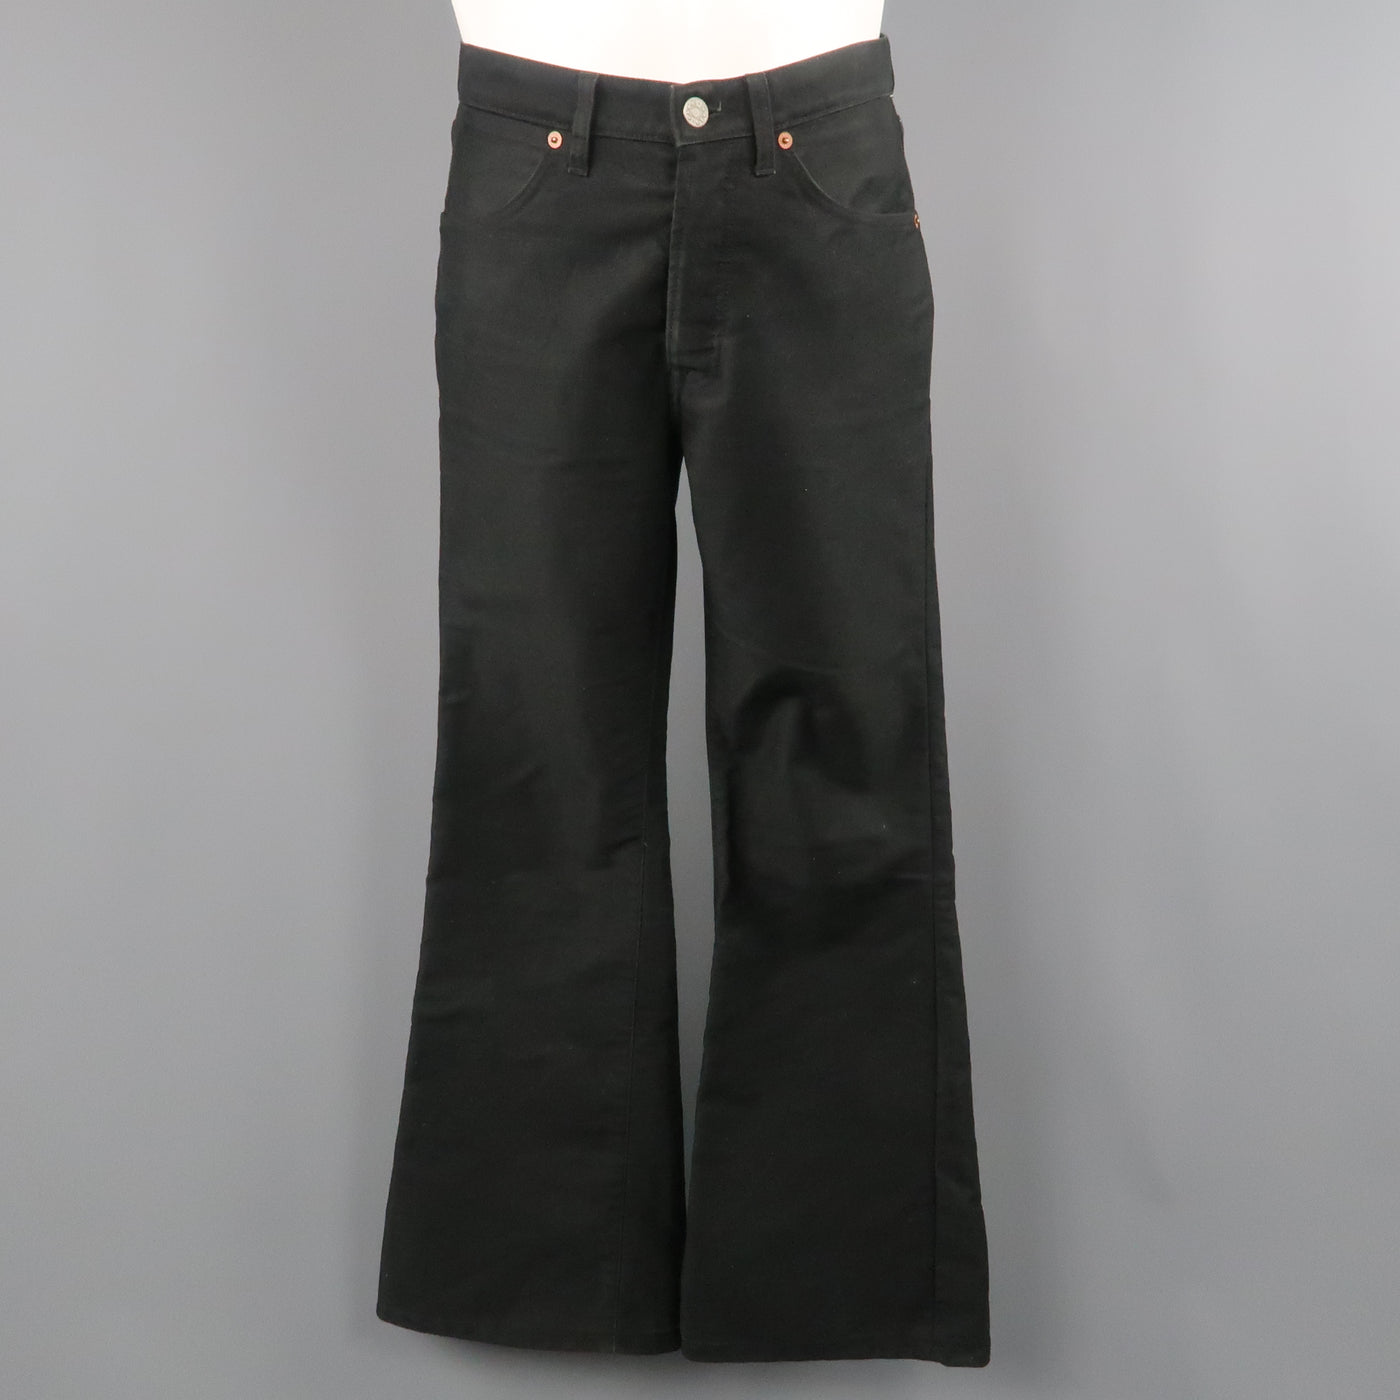 GUCCI by TOM FORD Size 29 Black Cotton Flared Bell Bottom Jeans